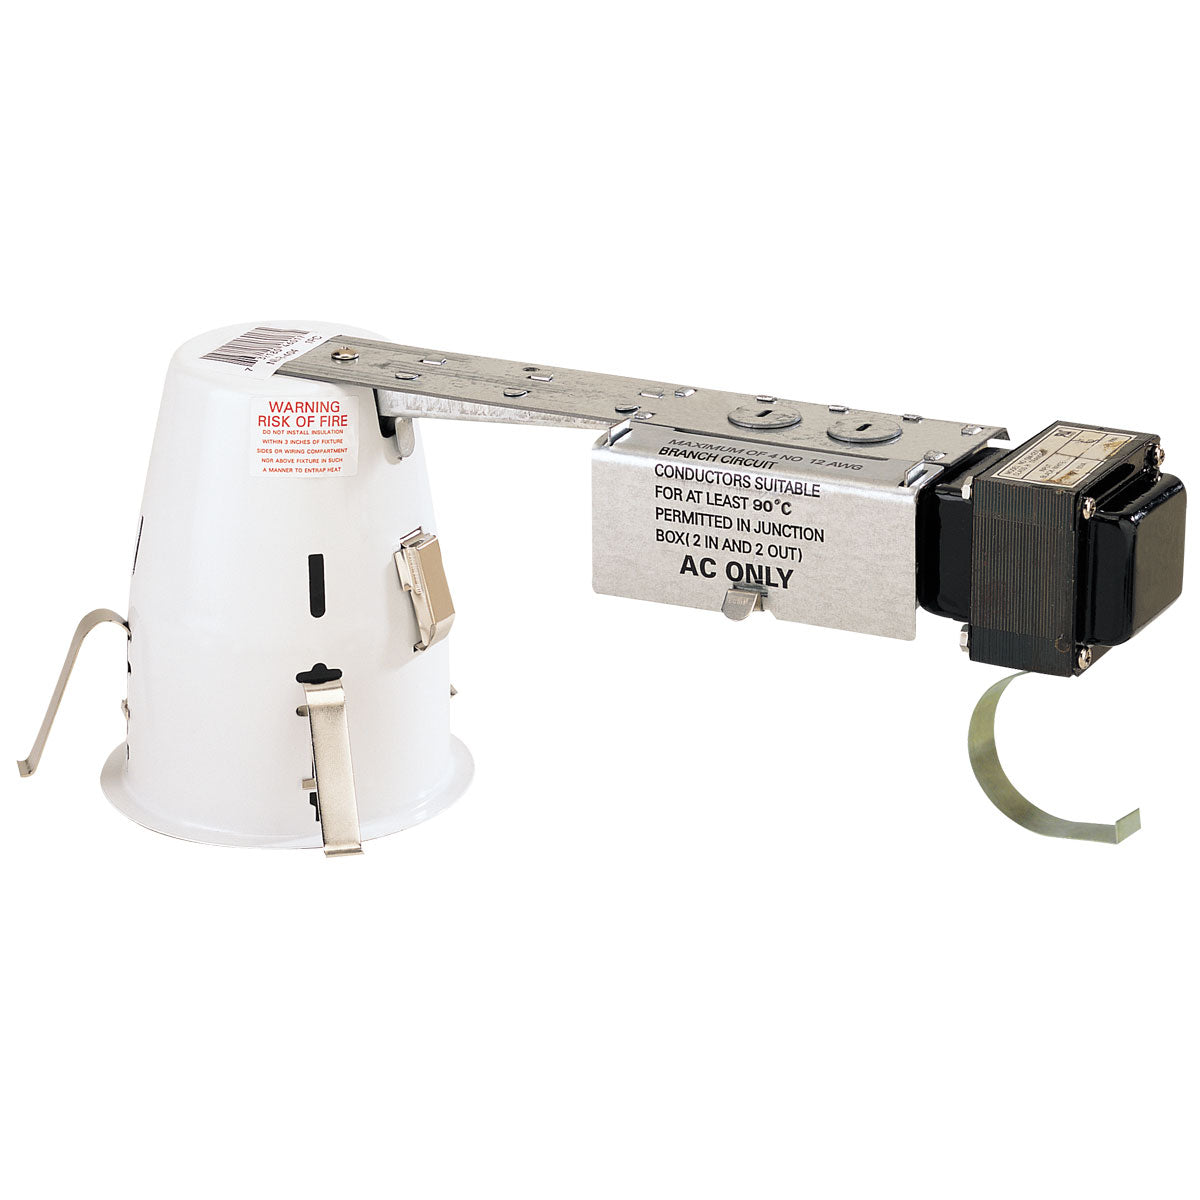 Nora Lighting NLR-404QAT/20 - Recessed - 4 Inch AT Low Voltage Housing, 120V/12V Mag. Transformer, Rated for 20W